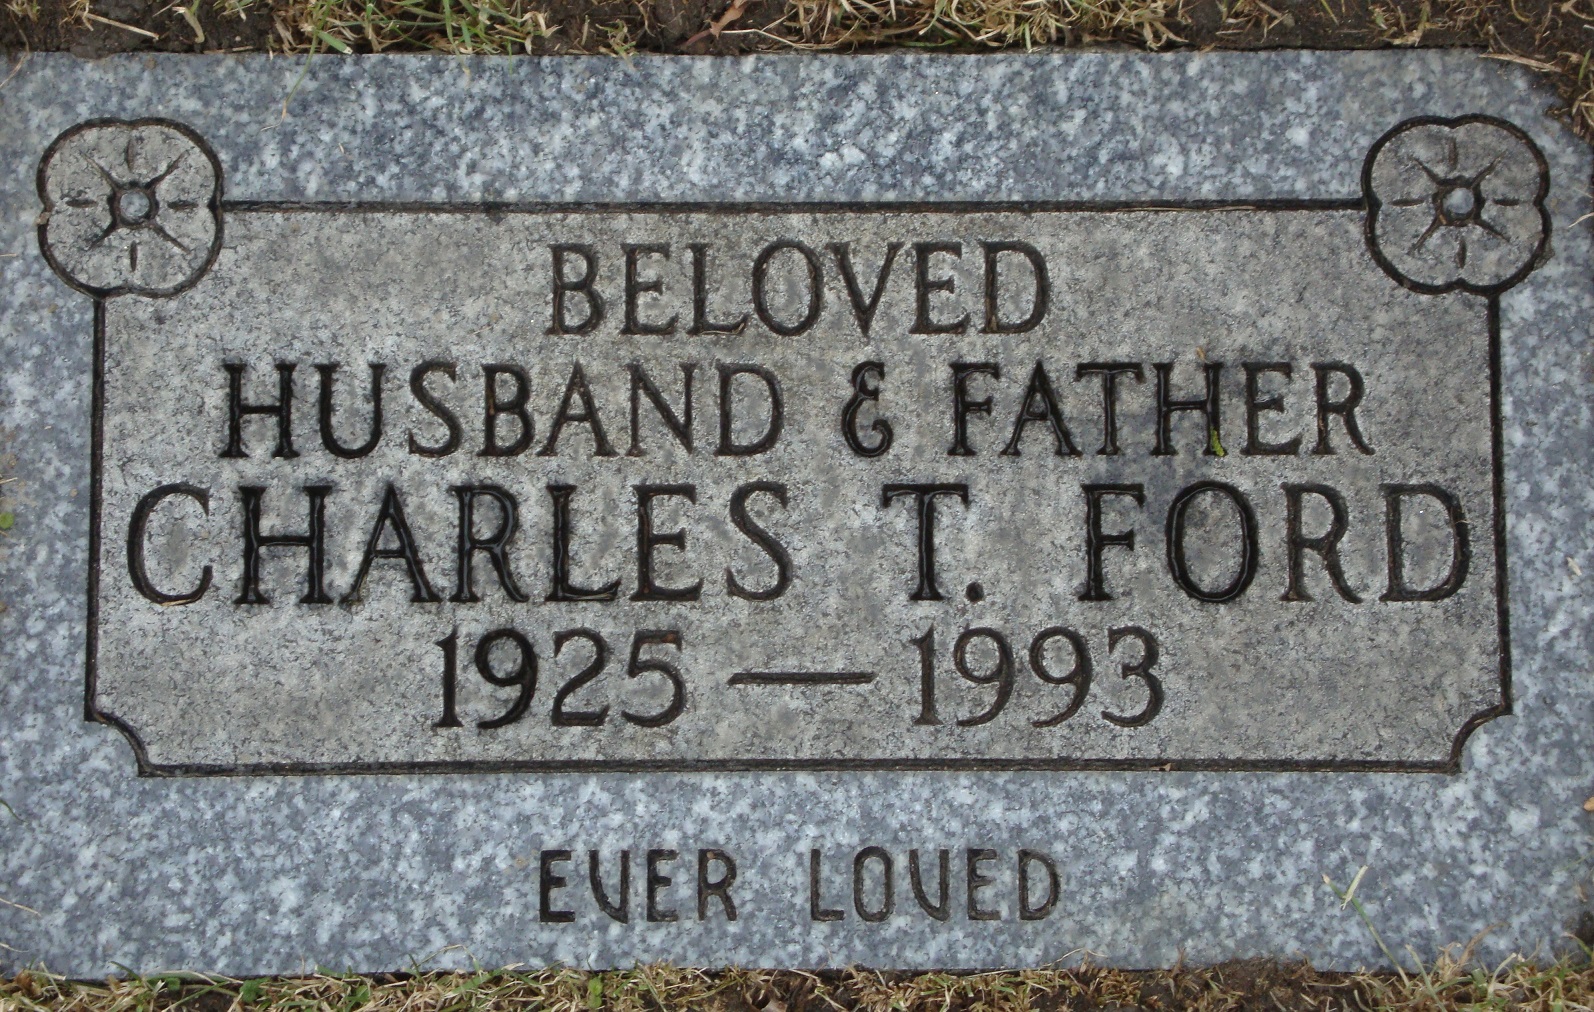 Charles T Ford 1925-1993